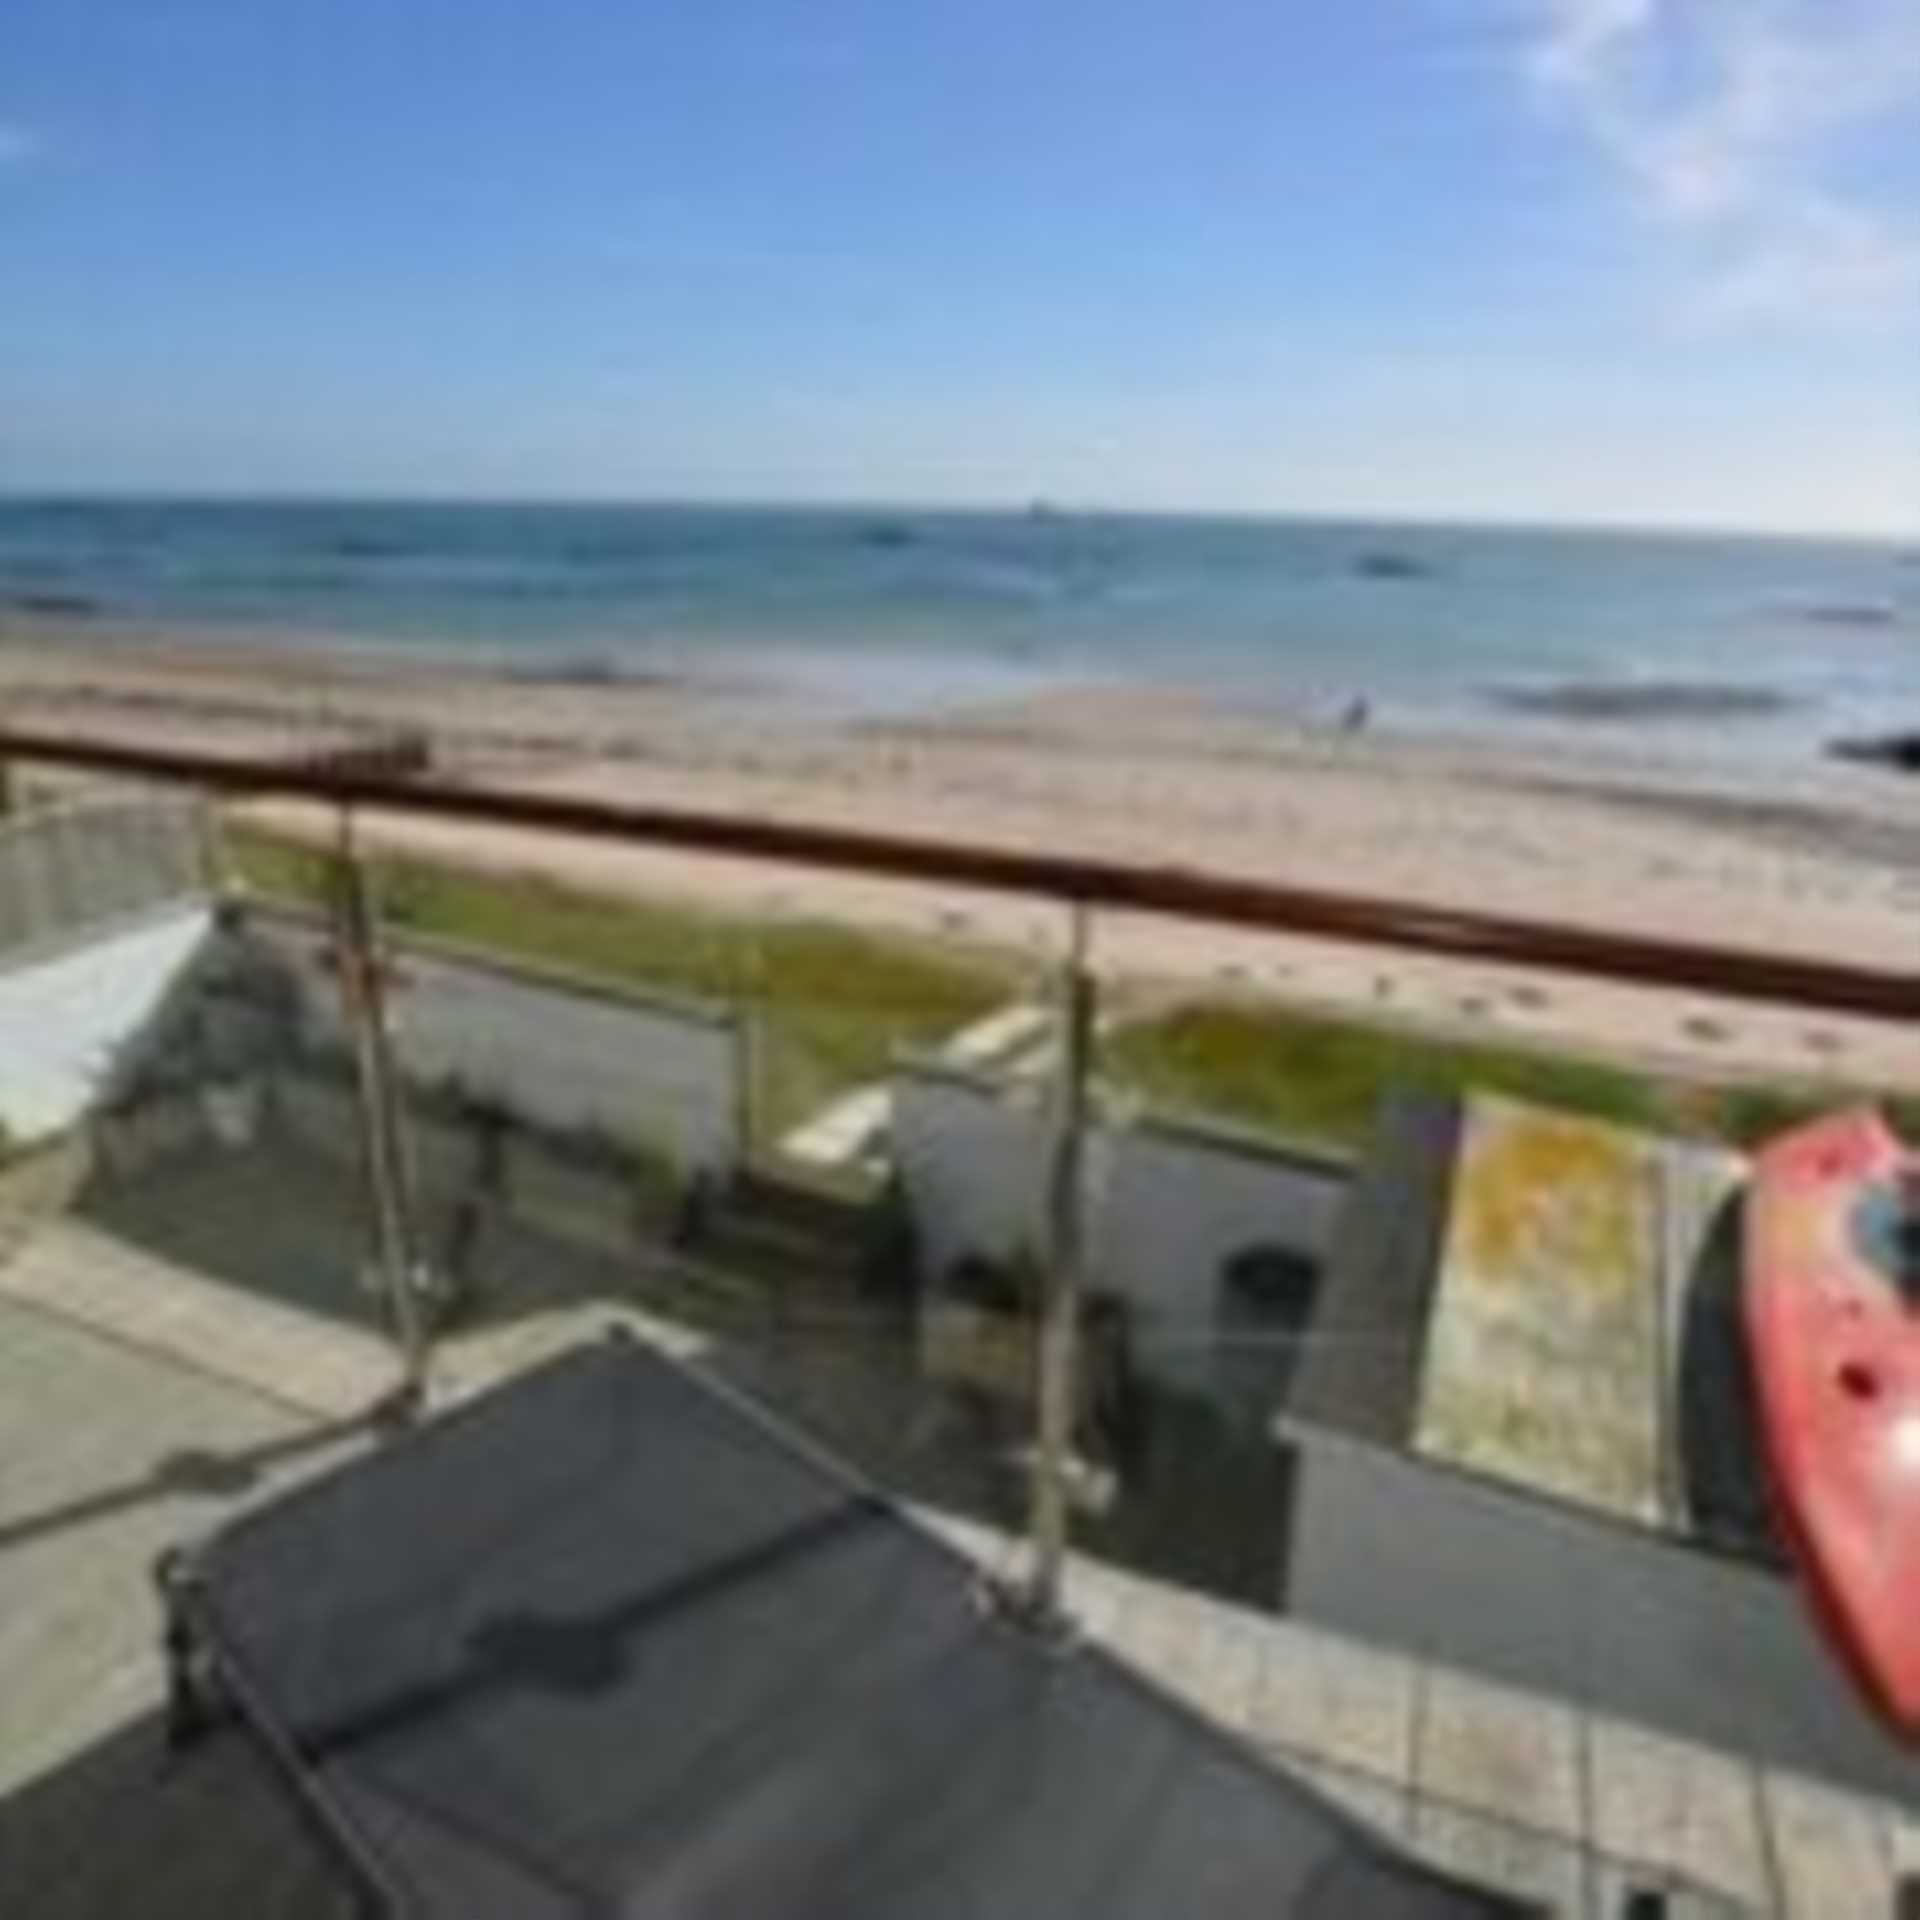 STUNNING 3 BEDROOM BEACH HOUSE TO RENT FROM JUNE JUST IN TIME FOR SUMMER ON THE BEACH, Image 9